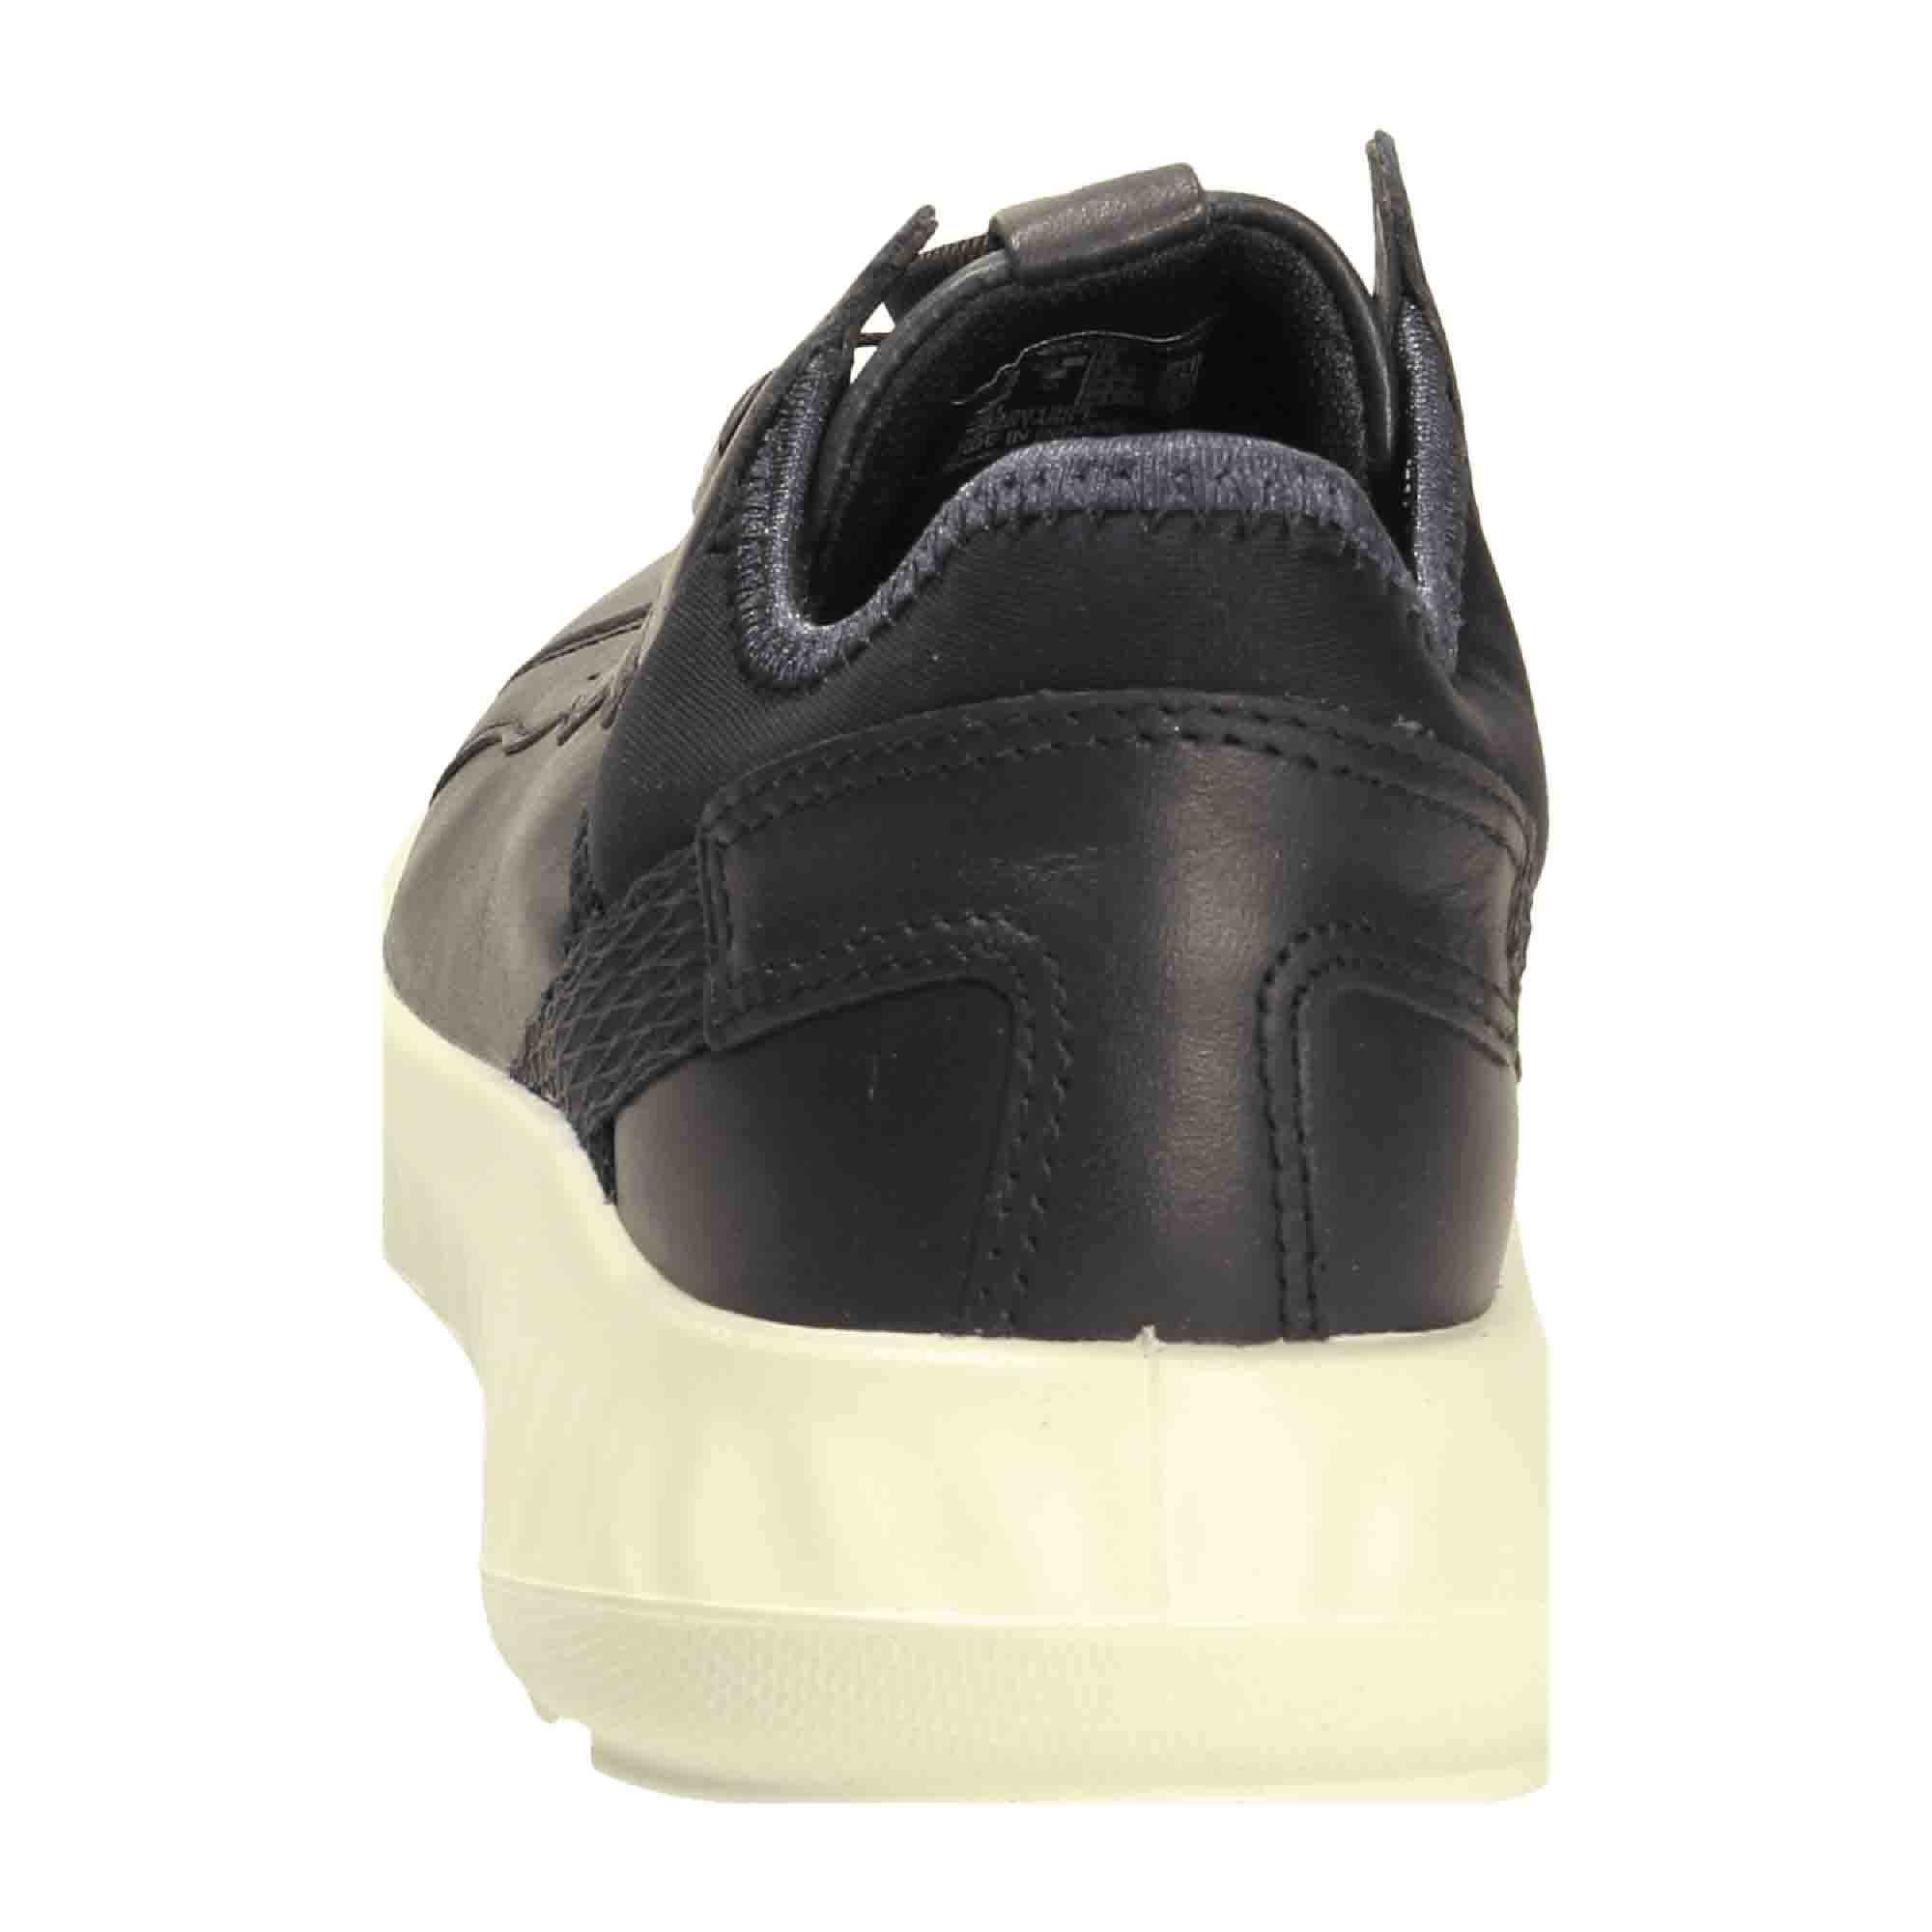 Ecco Kids Durable Blue Shoes for Children - Comfortable & Stylish